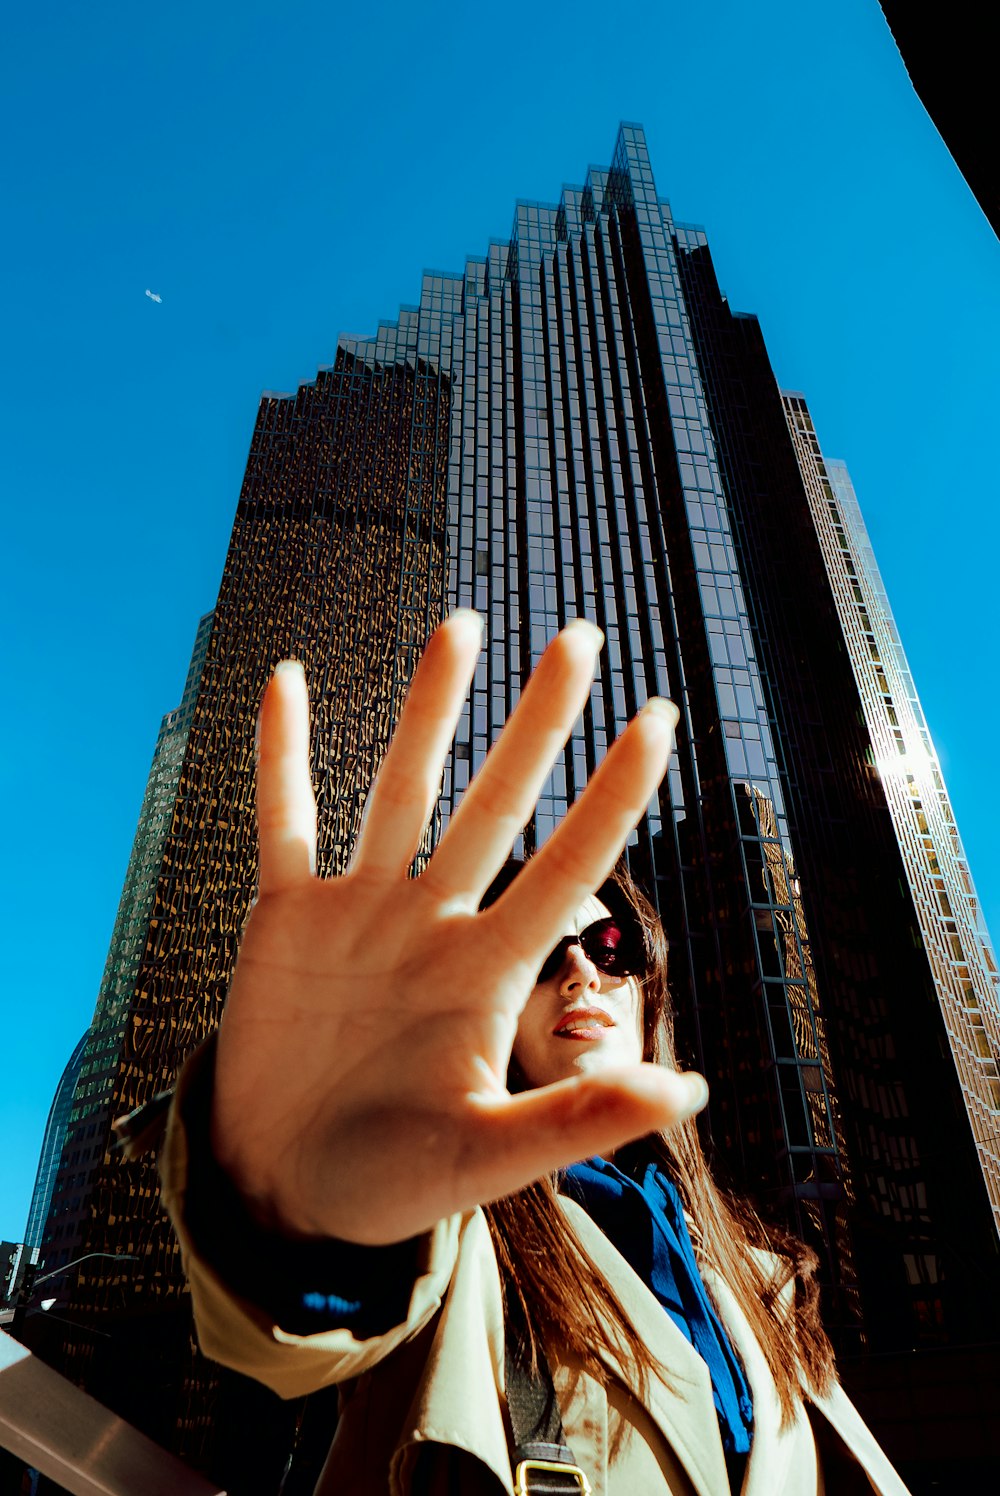 a woman making a hand gesture in front of a tall building